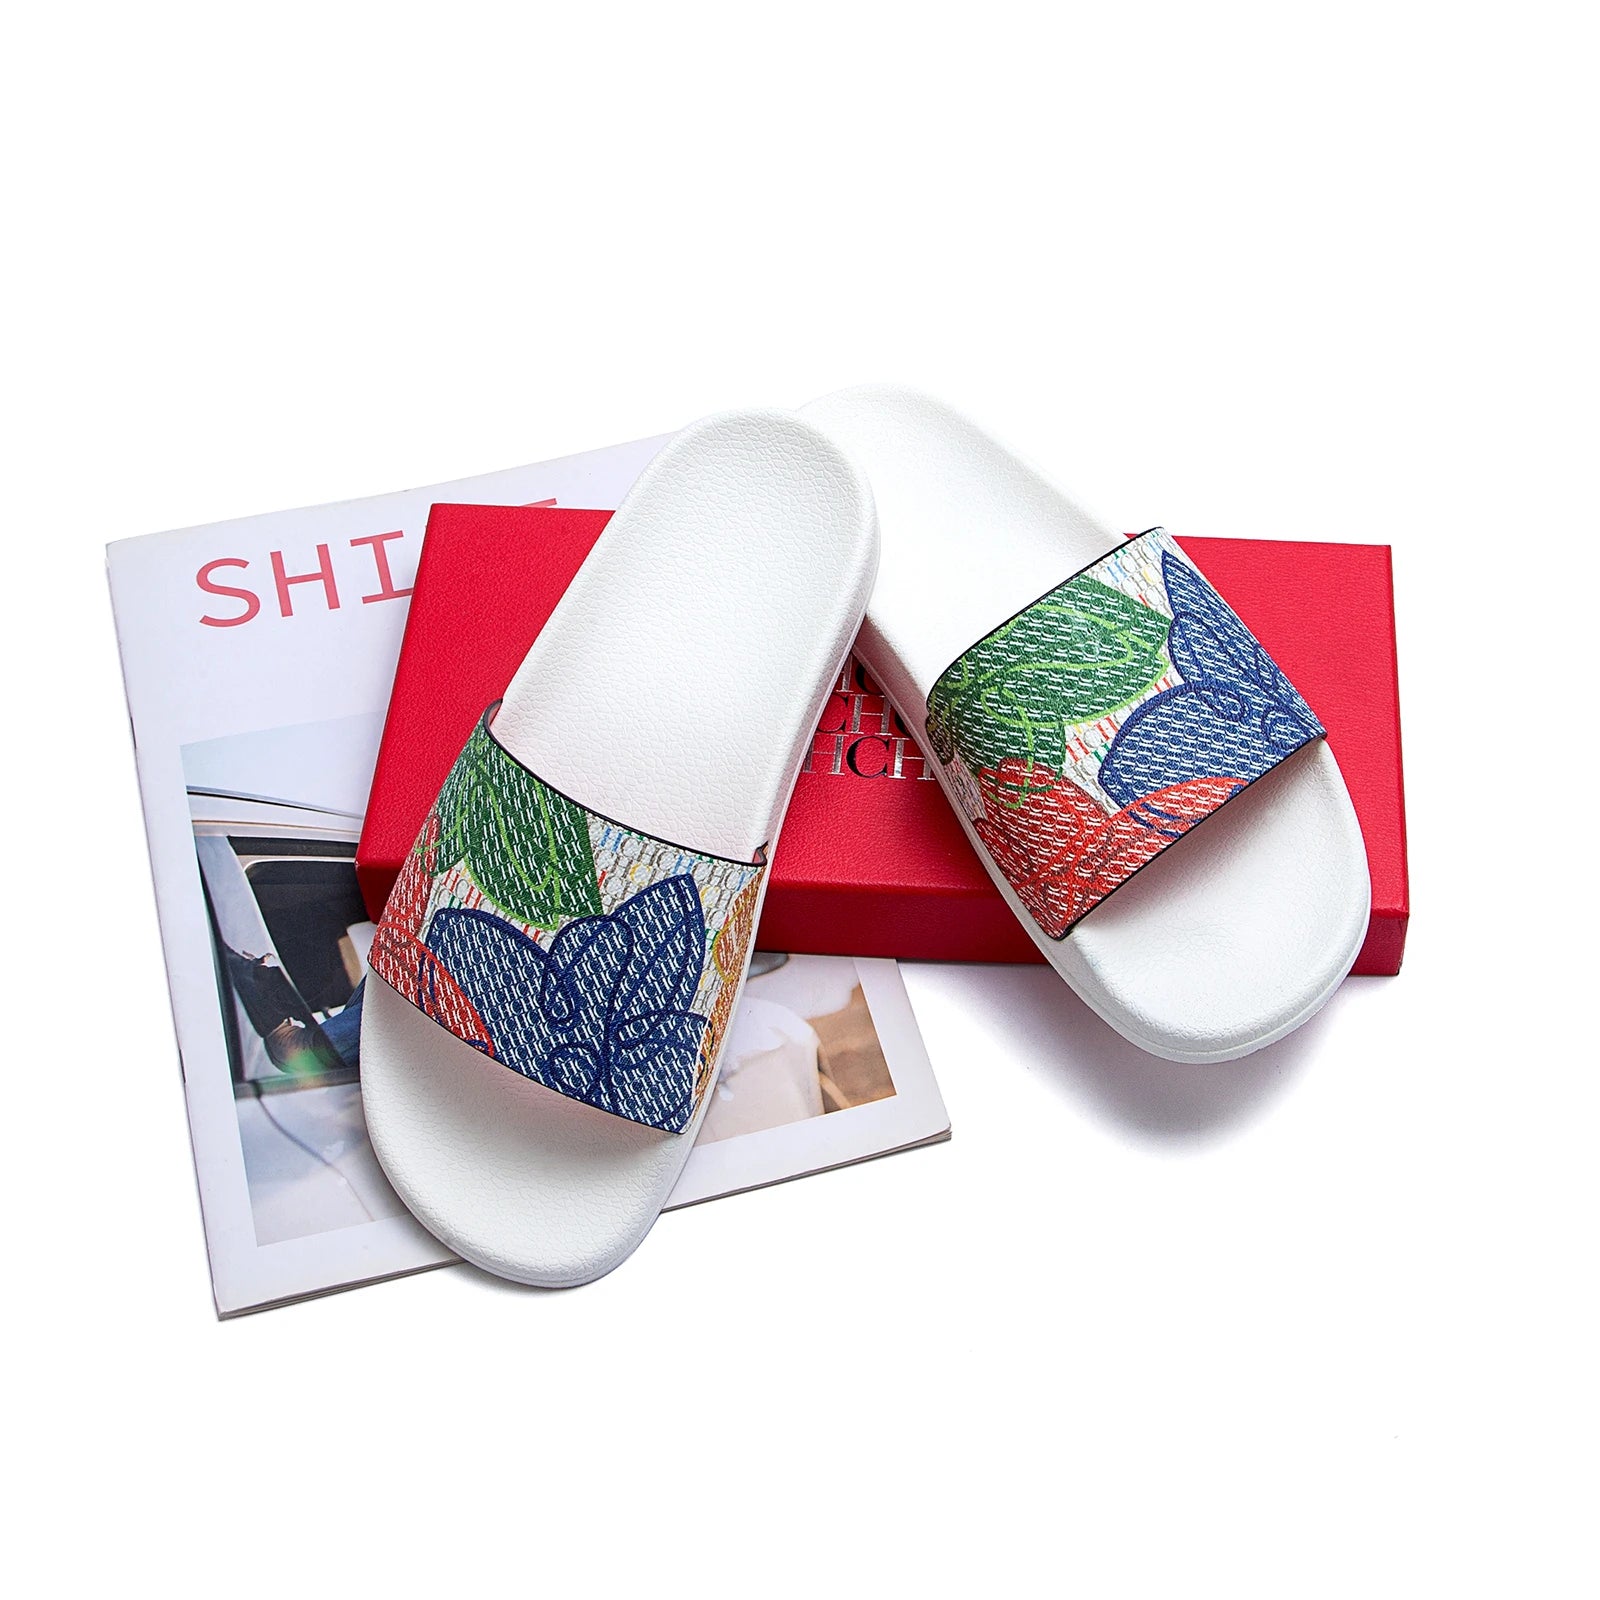 CILMI HARVILL CHHC Women's Slippers Gorgeous Exquisite Patterns Gift Box Packaging Fashionable Comfortable Waterproof Pvc